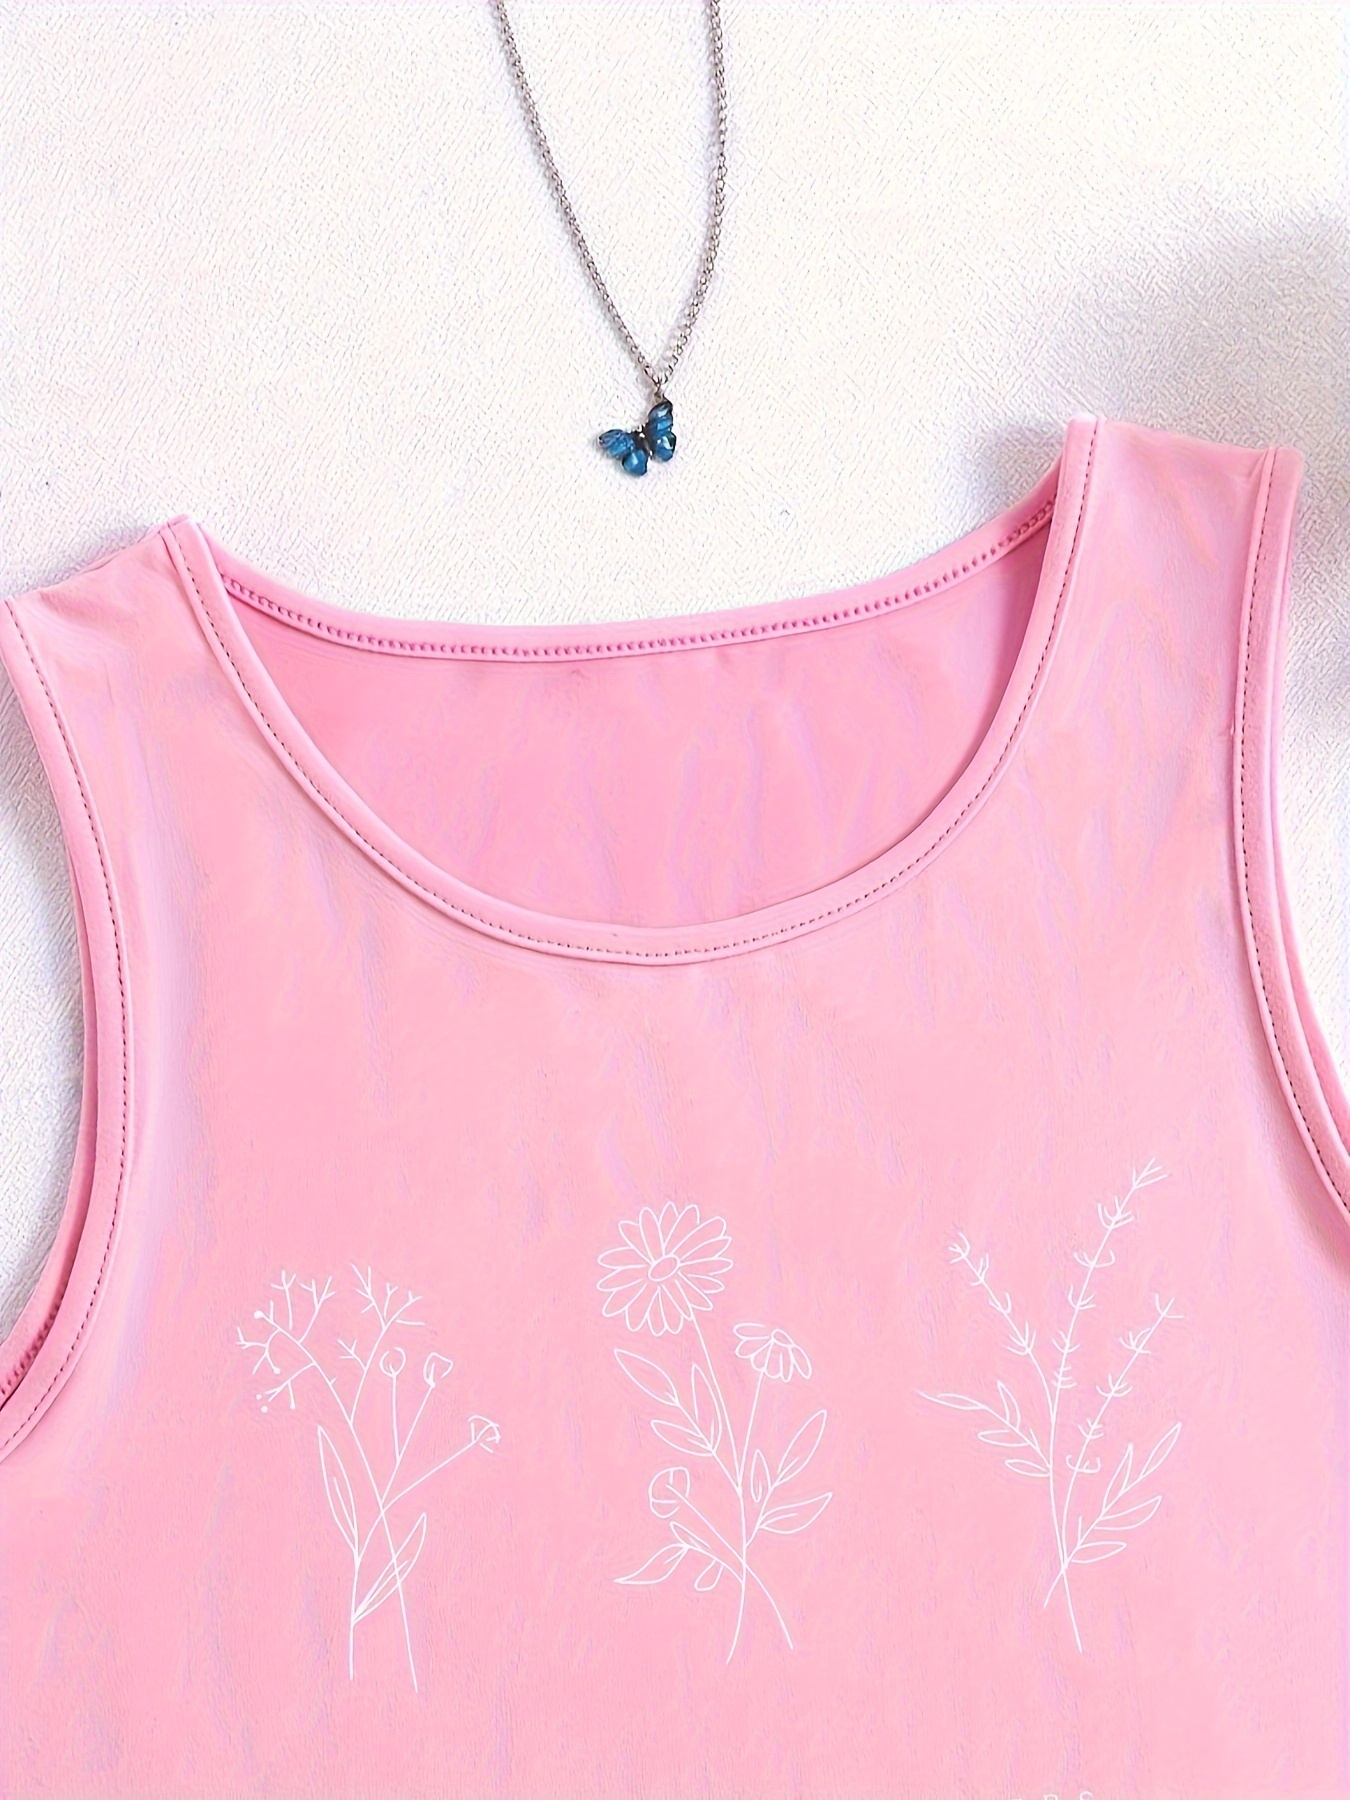 🌼✨Cute pastel crop top. Casual sleeveless crop top made with